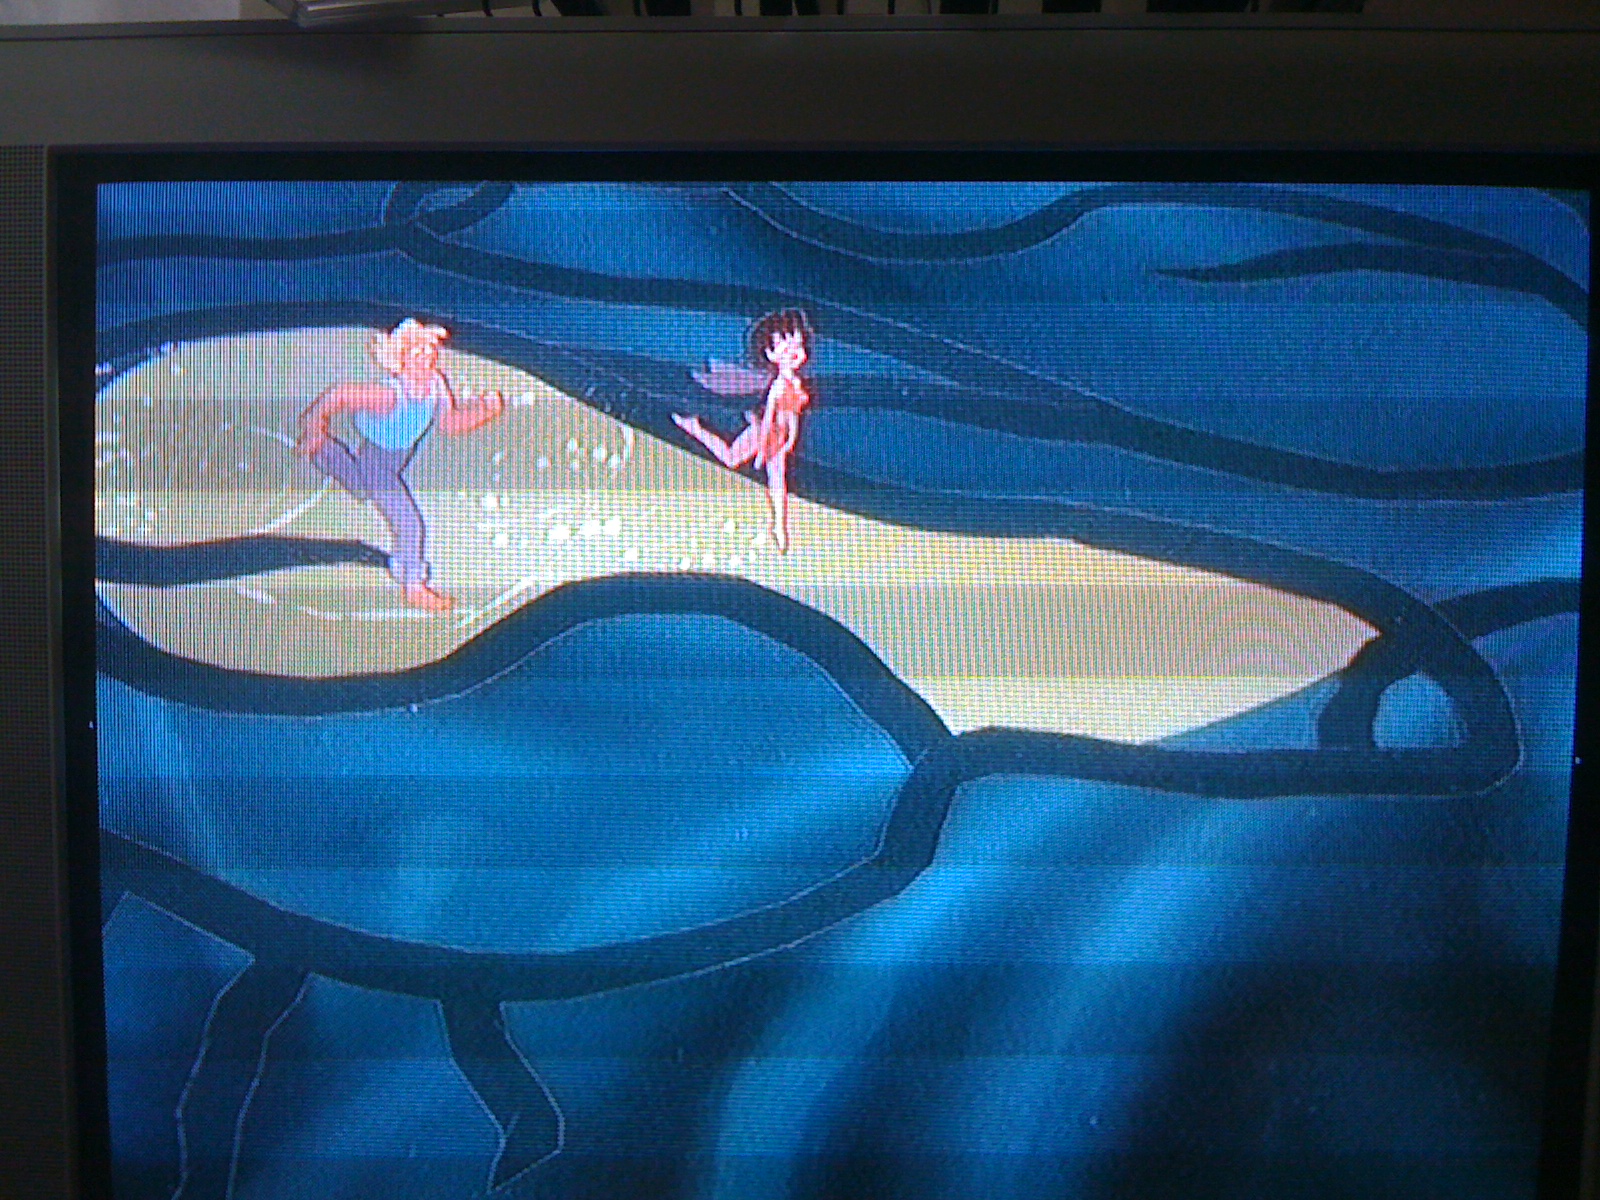 a paused screen shot of the movie Fern Gully. Theres a clear subliminal penis in the background.